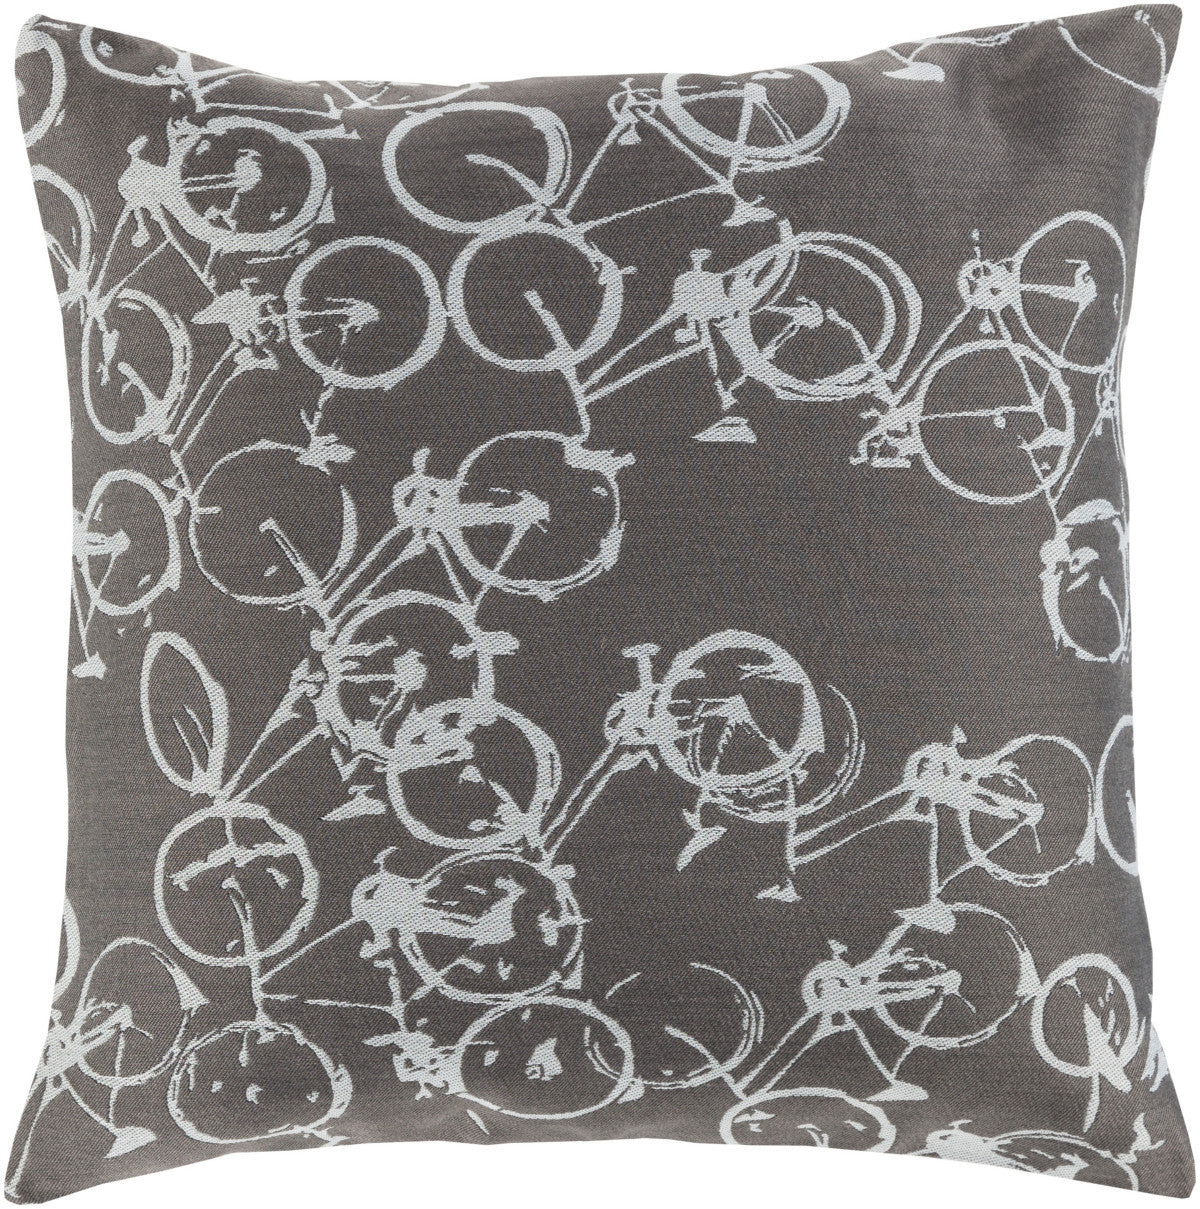 Surya Pedal Power Bold Bicycles PDP-005 Pillow by Mike Farrell